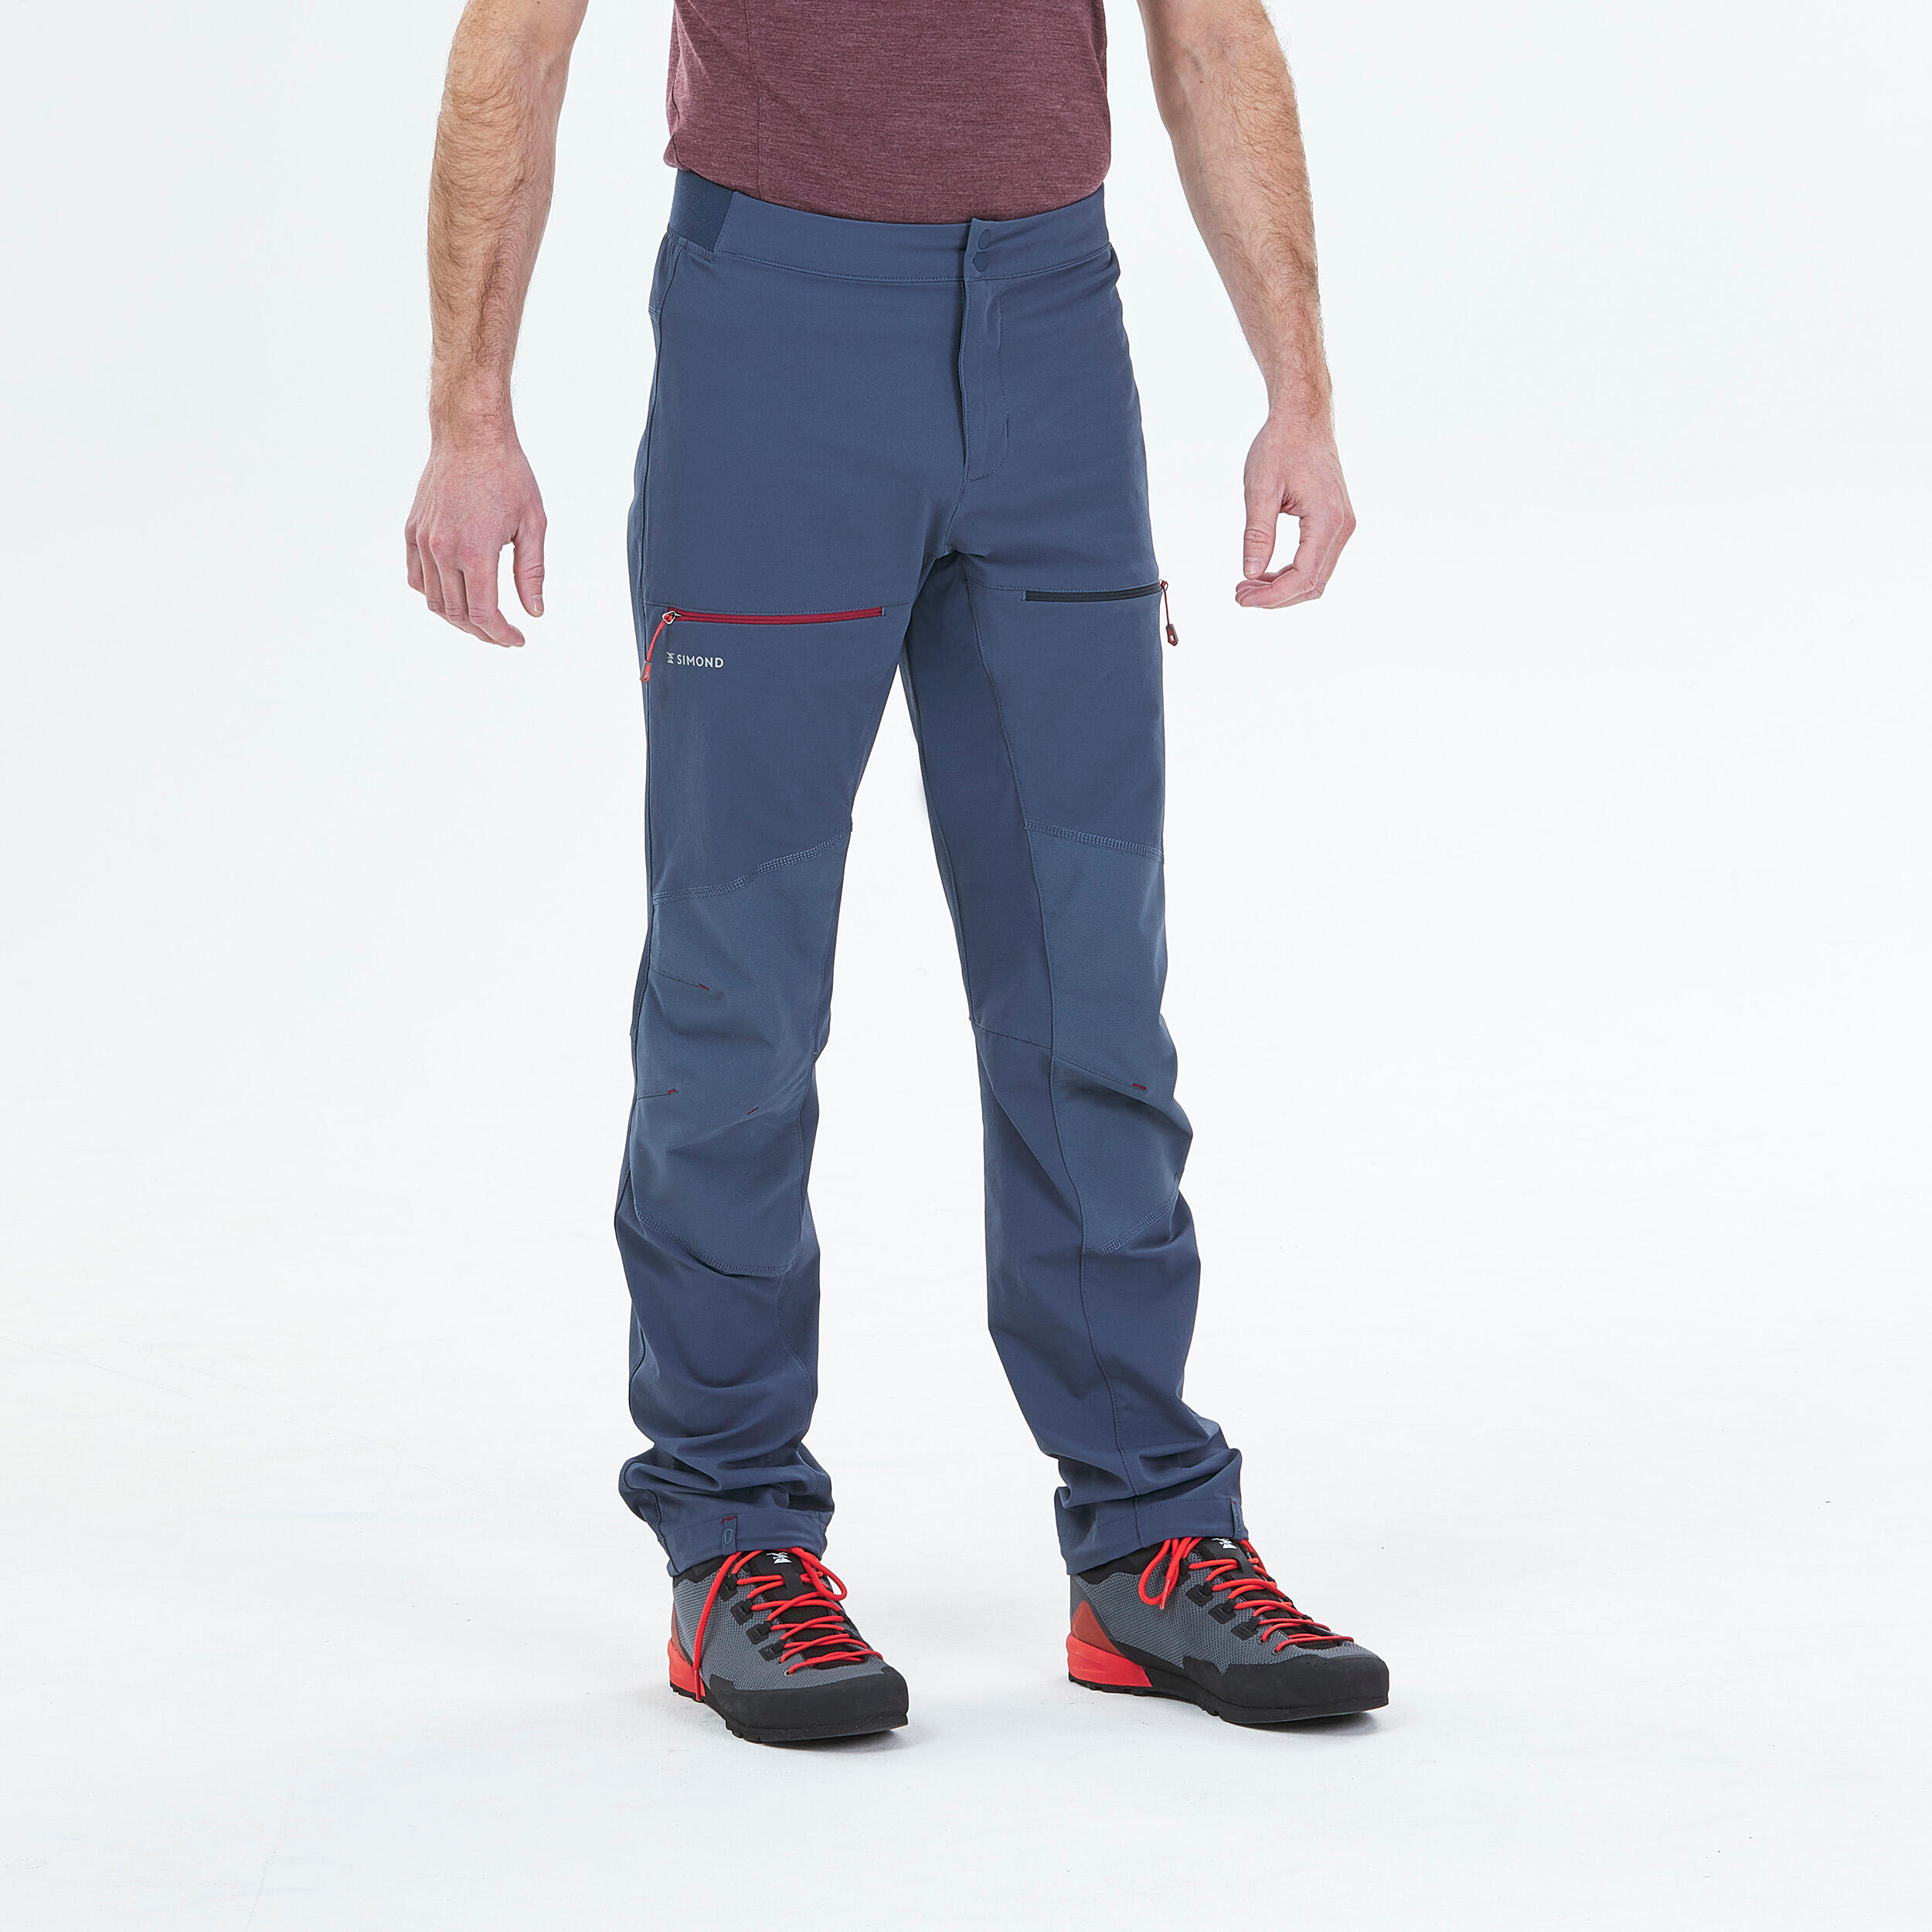 Men's climbing and mountaineering lightweight trousers - ROCK EVO - Blue 1/10